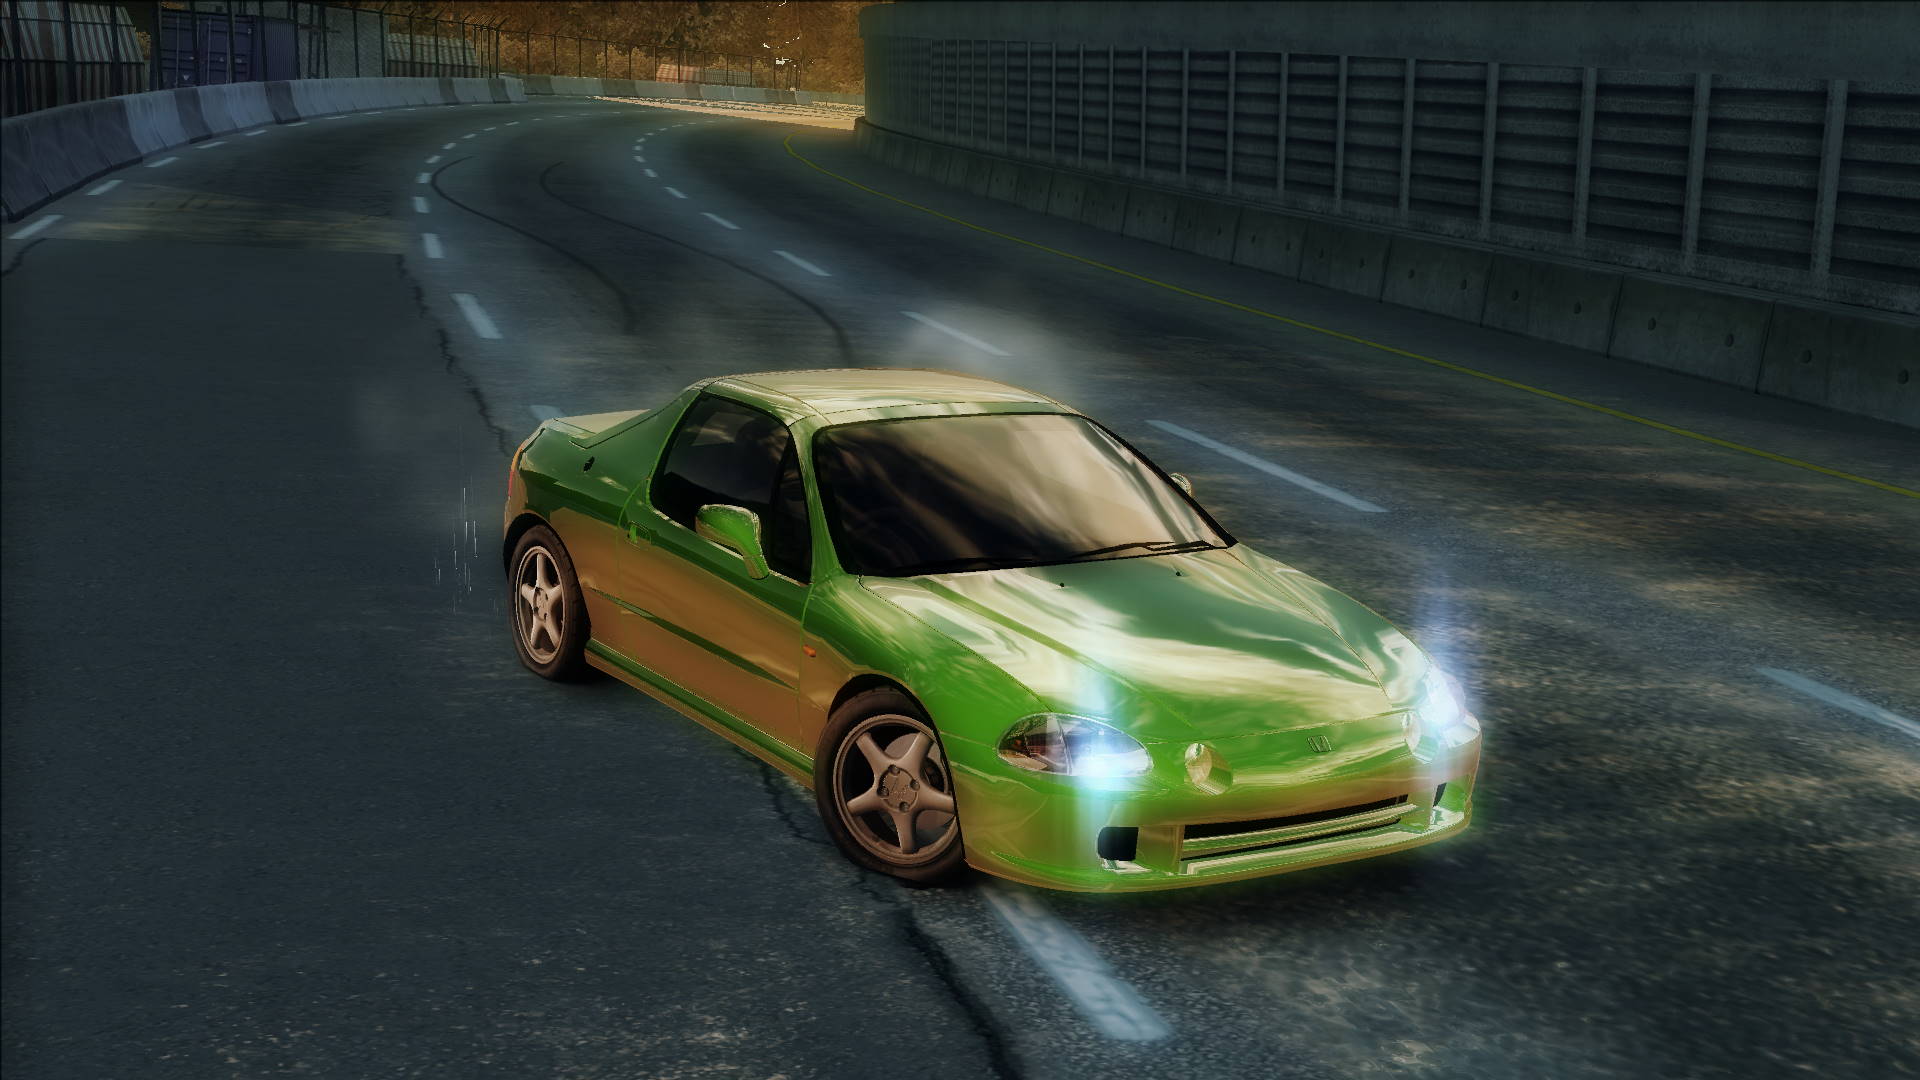 Need For Speed Undercover 1995 Honda Civic del Sol